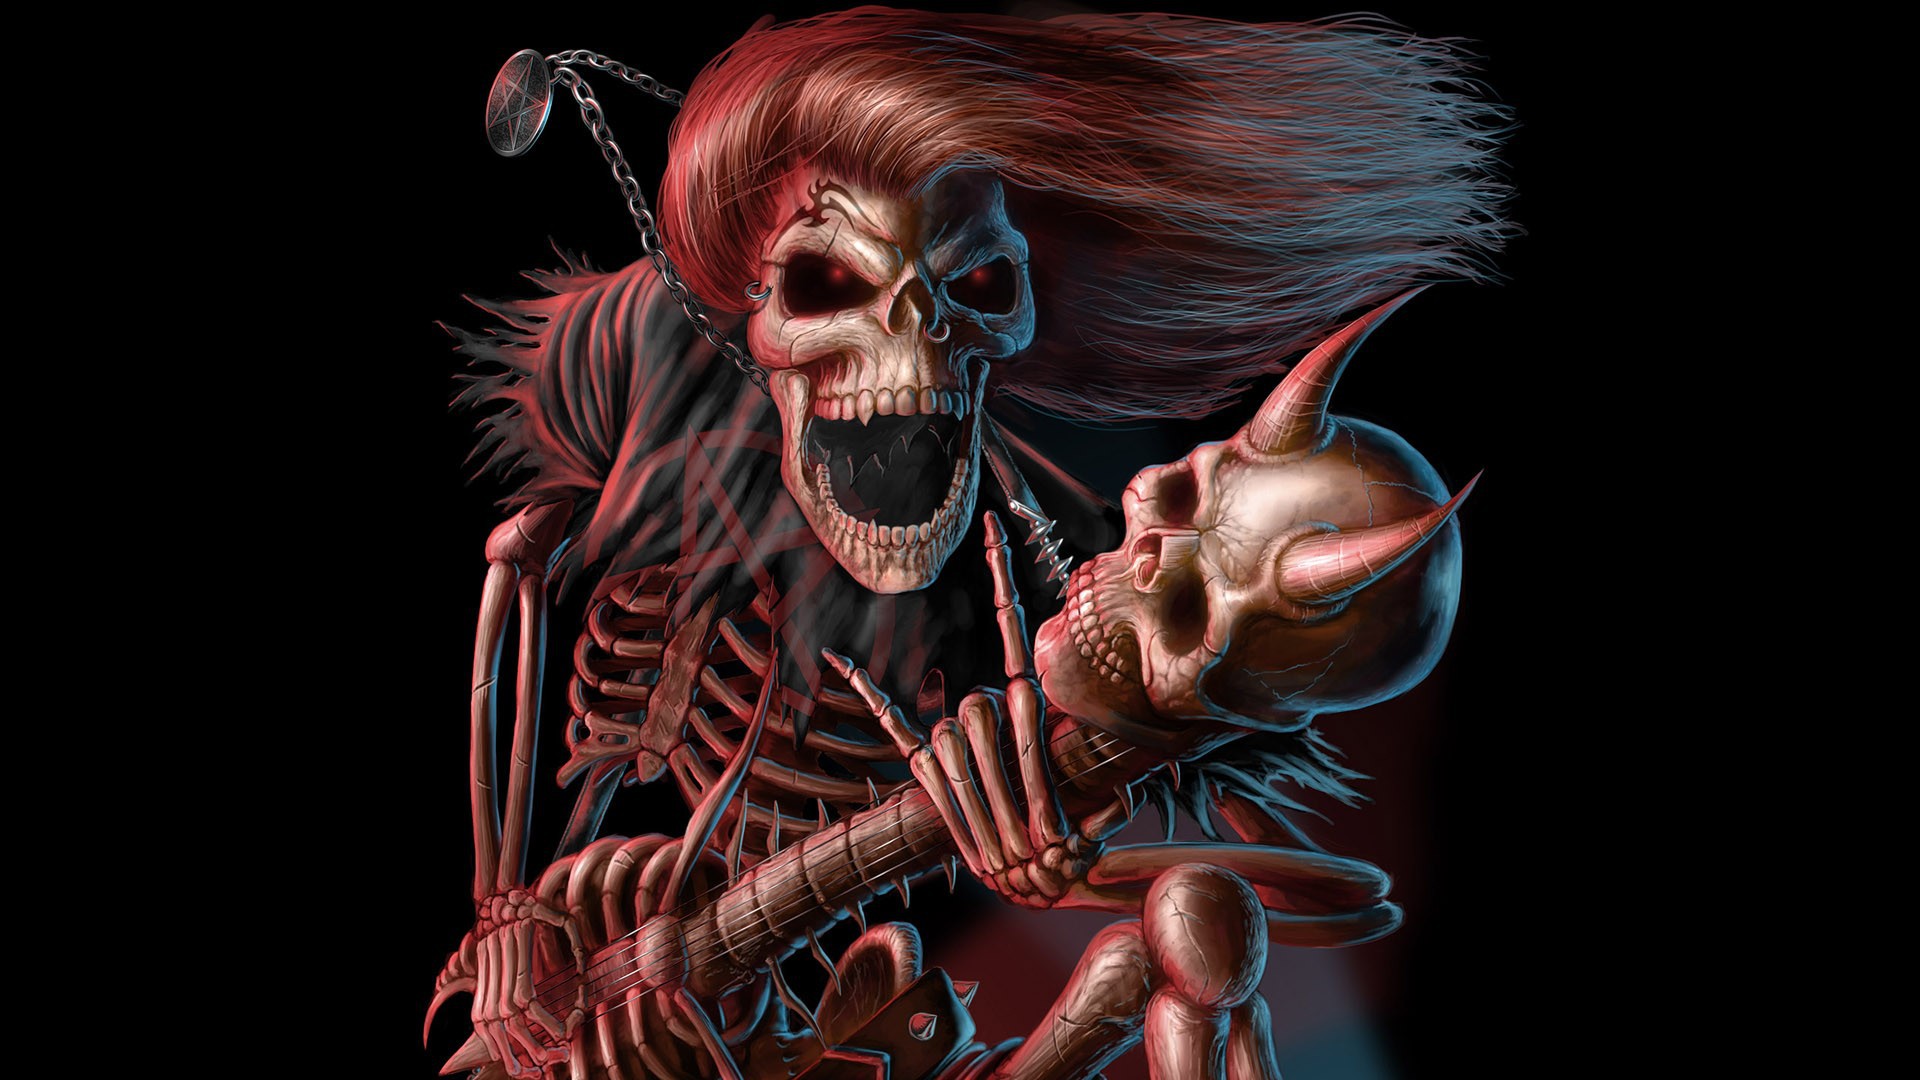 halloween undead ROCK STAR wallpapers and images - wallpapers ...